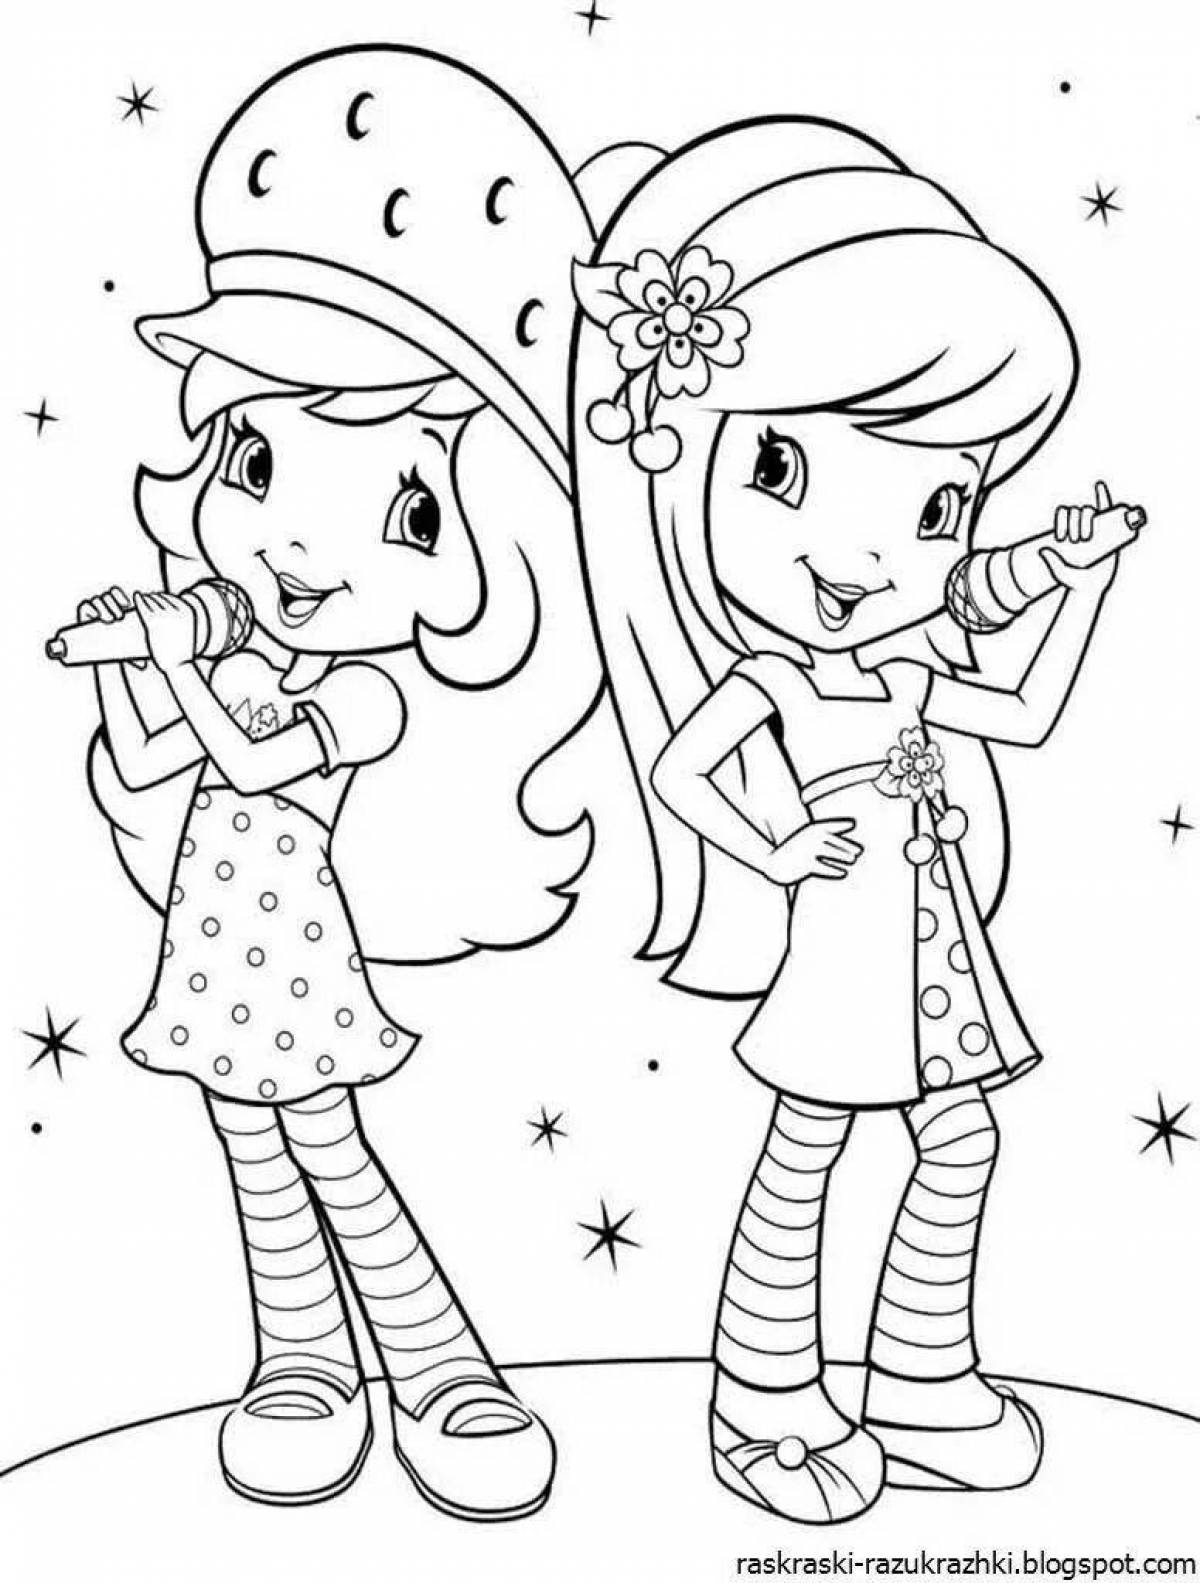 Great coloring book for girls